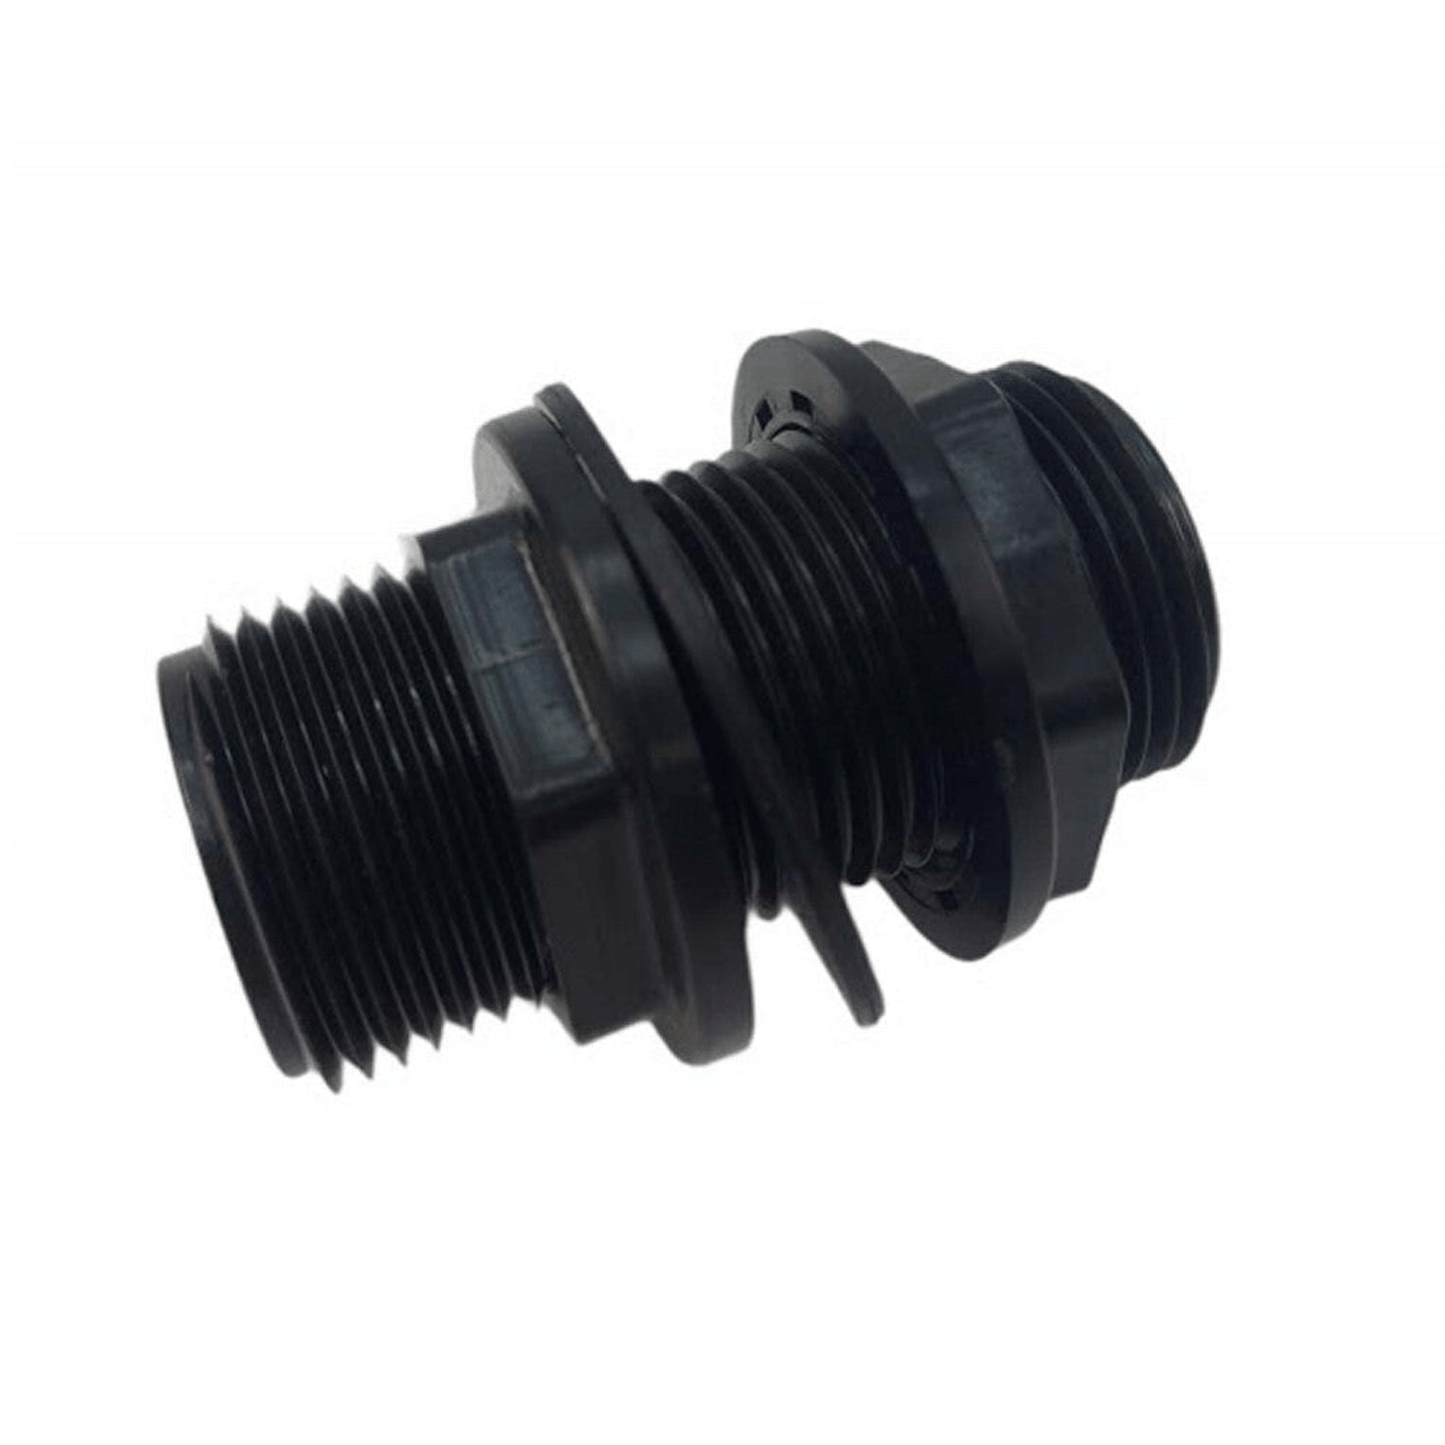 ALIEN Hydroponics Threaded Tank Connector 1" BD101-0037 Planting & Watering